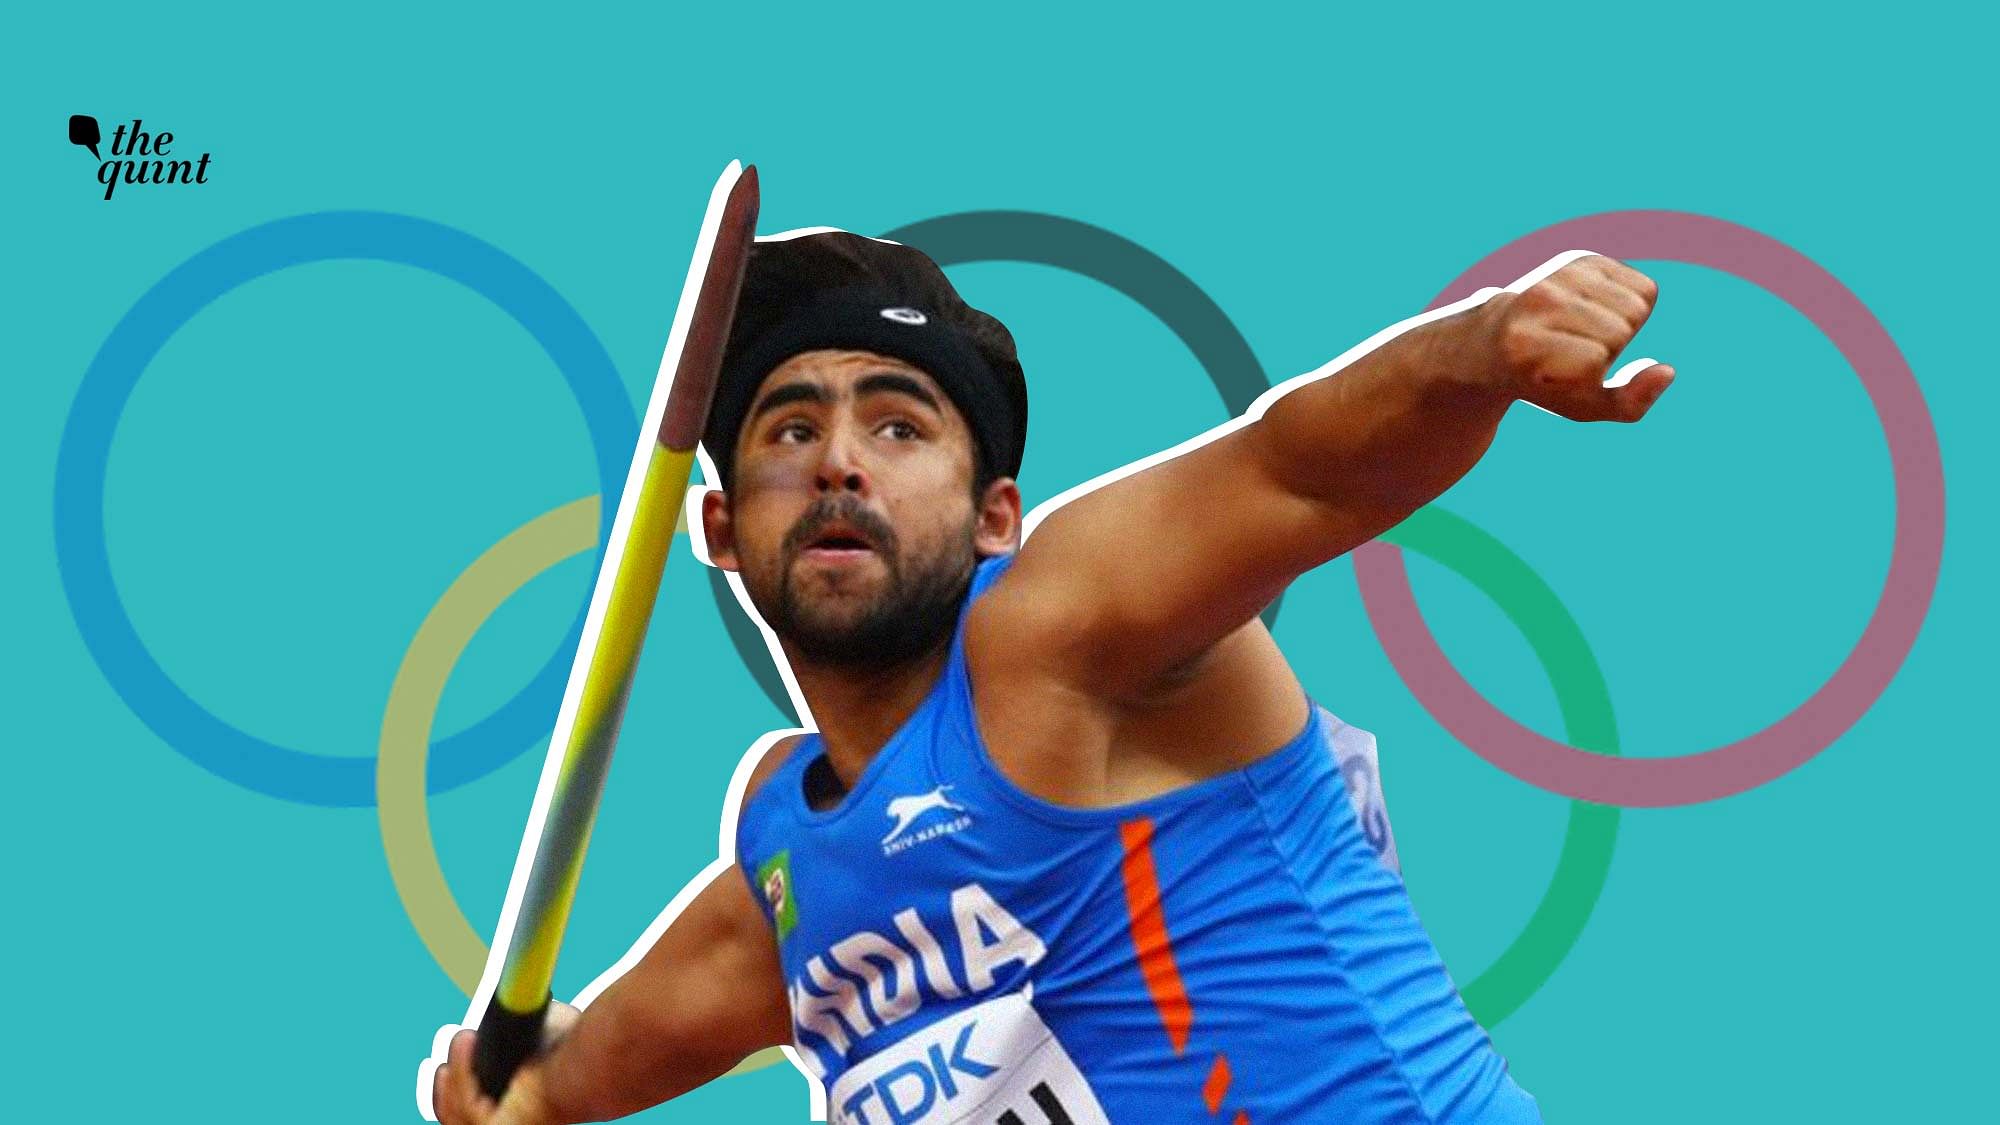 Apart from Neeraj Chopra, Shivpal is the second Indian Javelin thrower to qualify for the Tokyo 2020 Olympics.